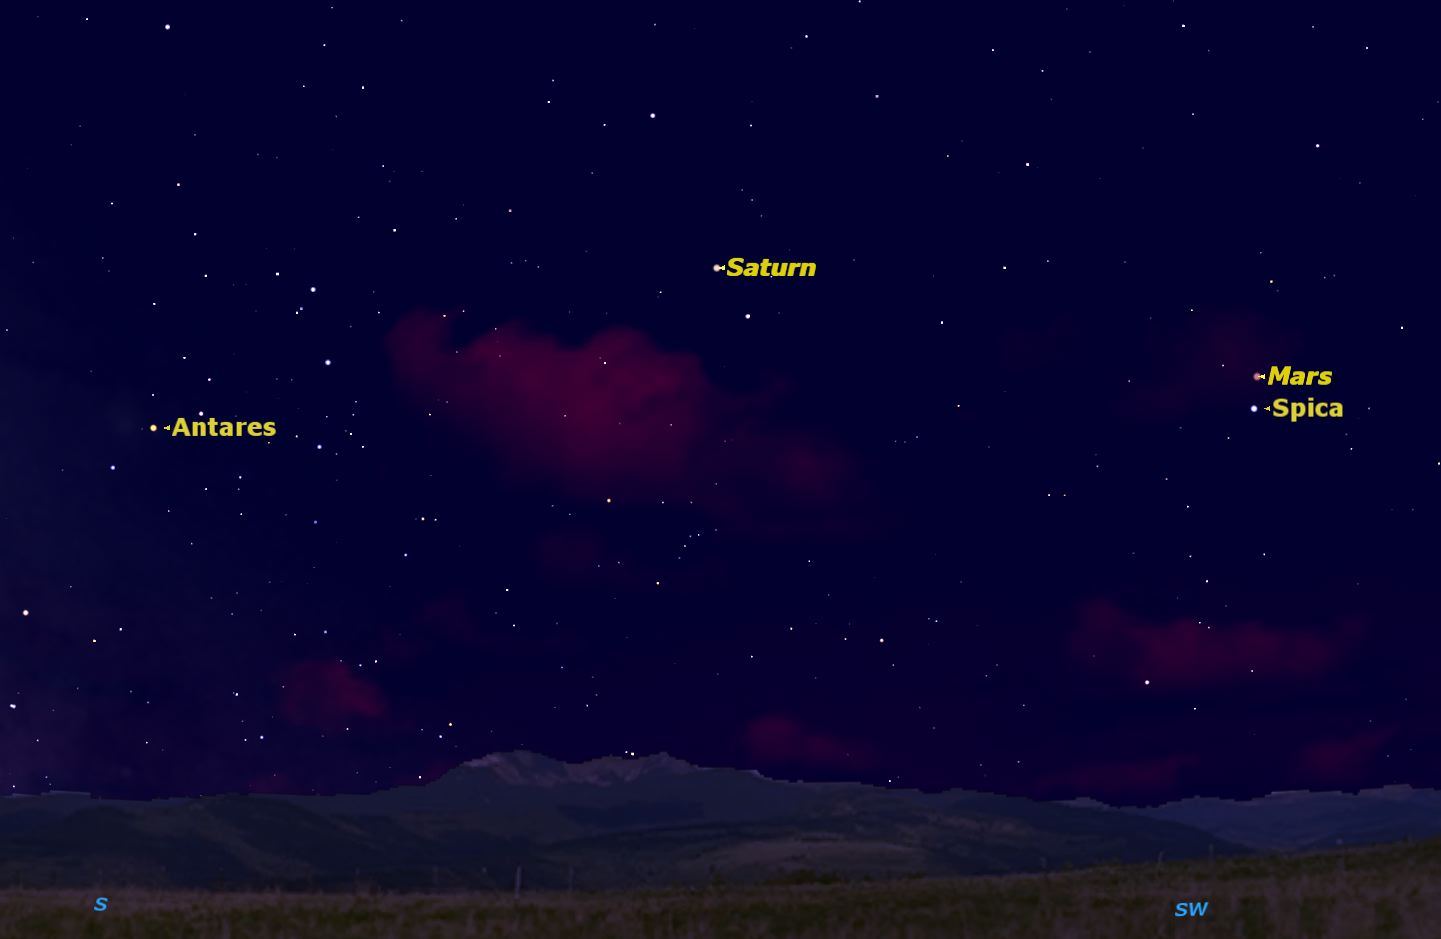 Just as twilight ends in the evening this week, the planet Mars and bright star Spica do a celestial dance. Antares and Saturn are nearby. Credit: Starry Night software.